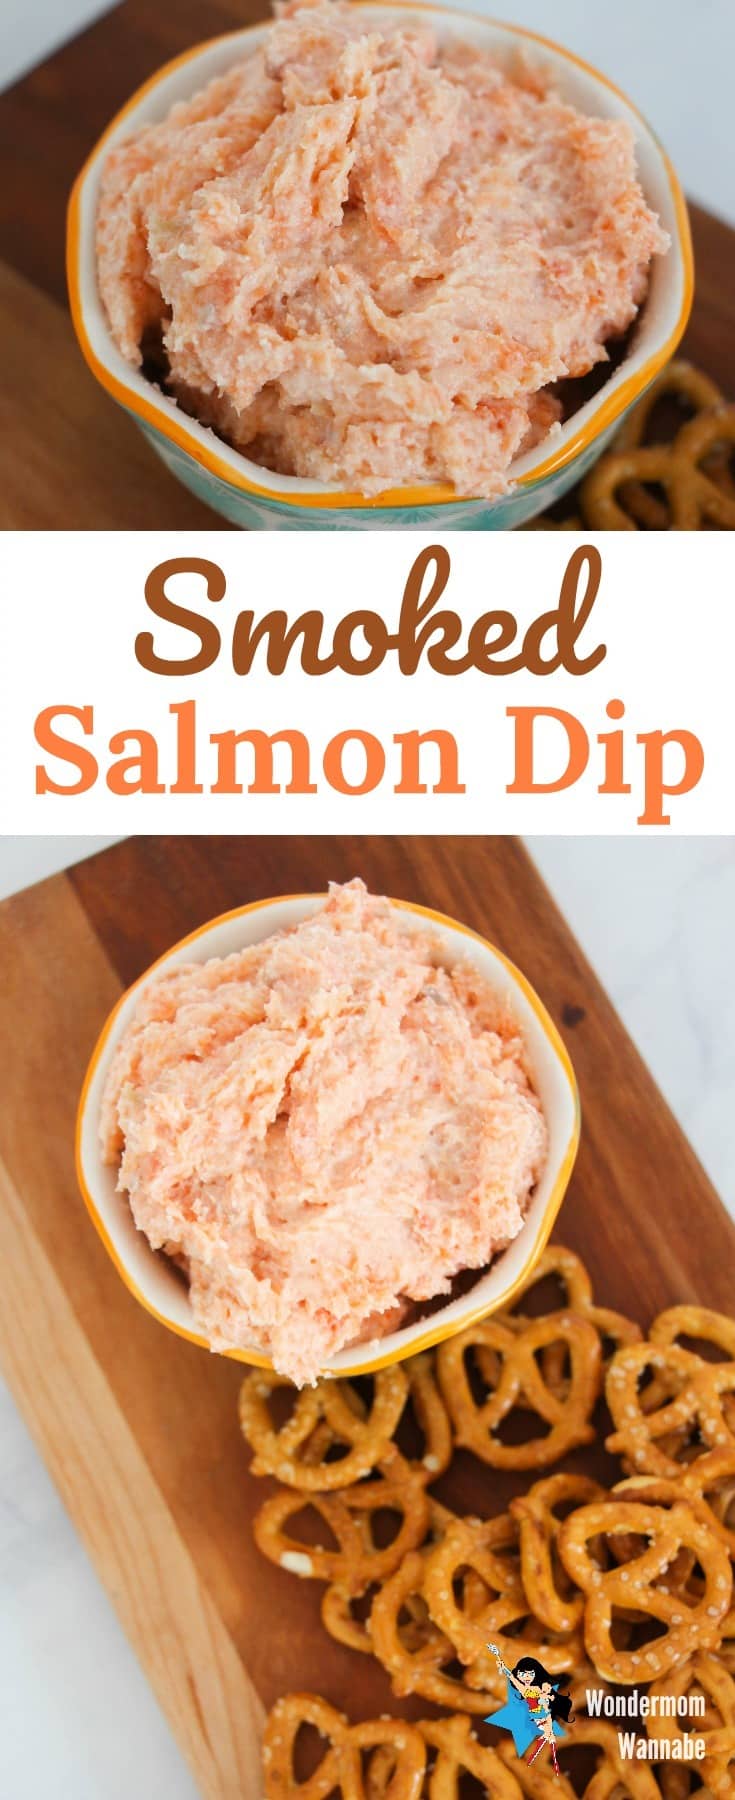 This smoked salmon dip is easy to throw together and is the perfect appetizer if you want something different than the usual dips and spreads. #smokedsalmon #dip #appetizer via @wondermomwannab